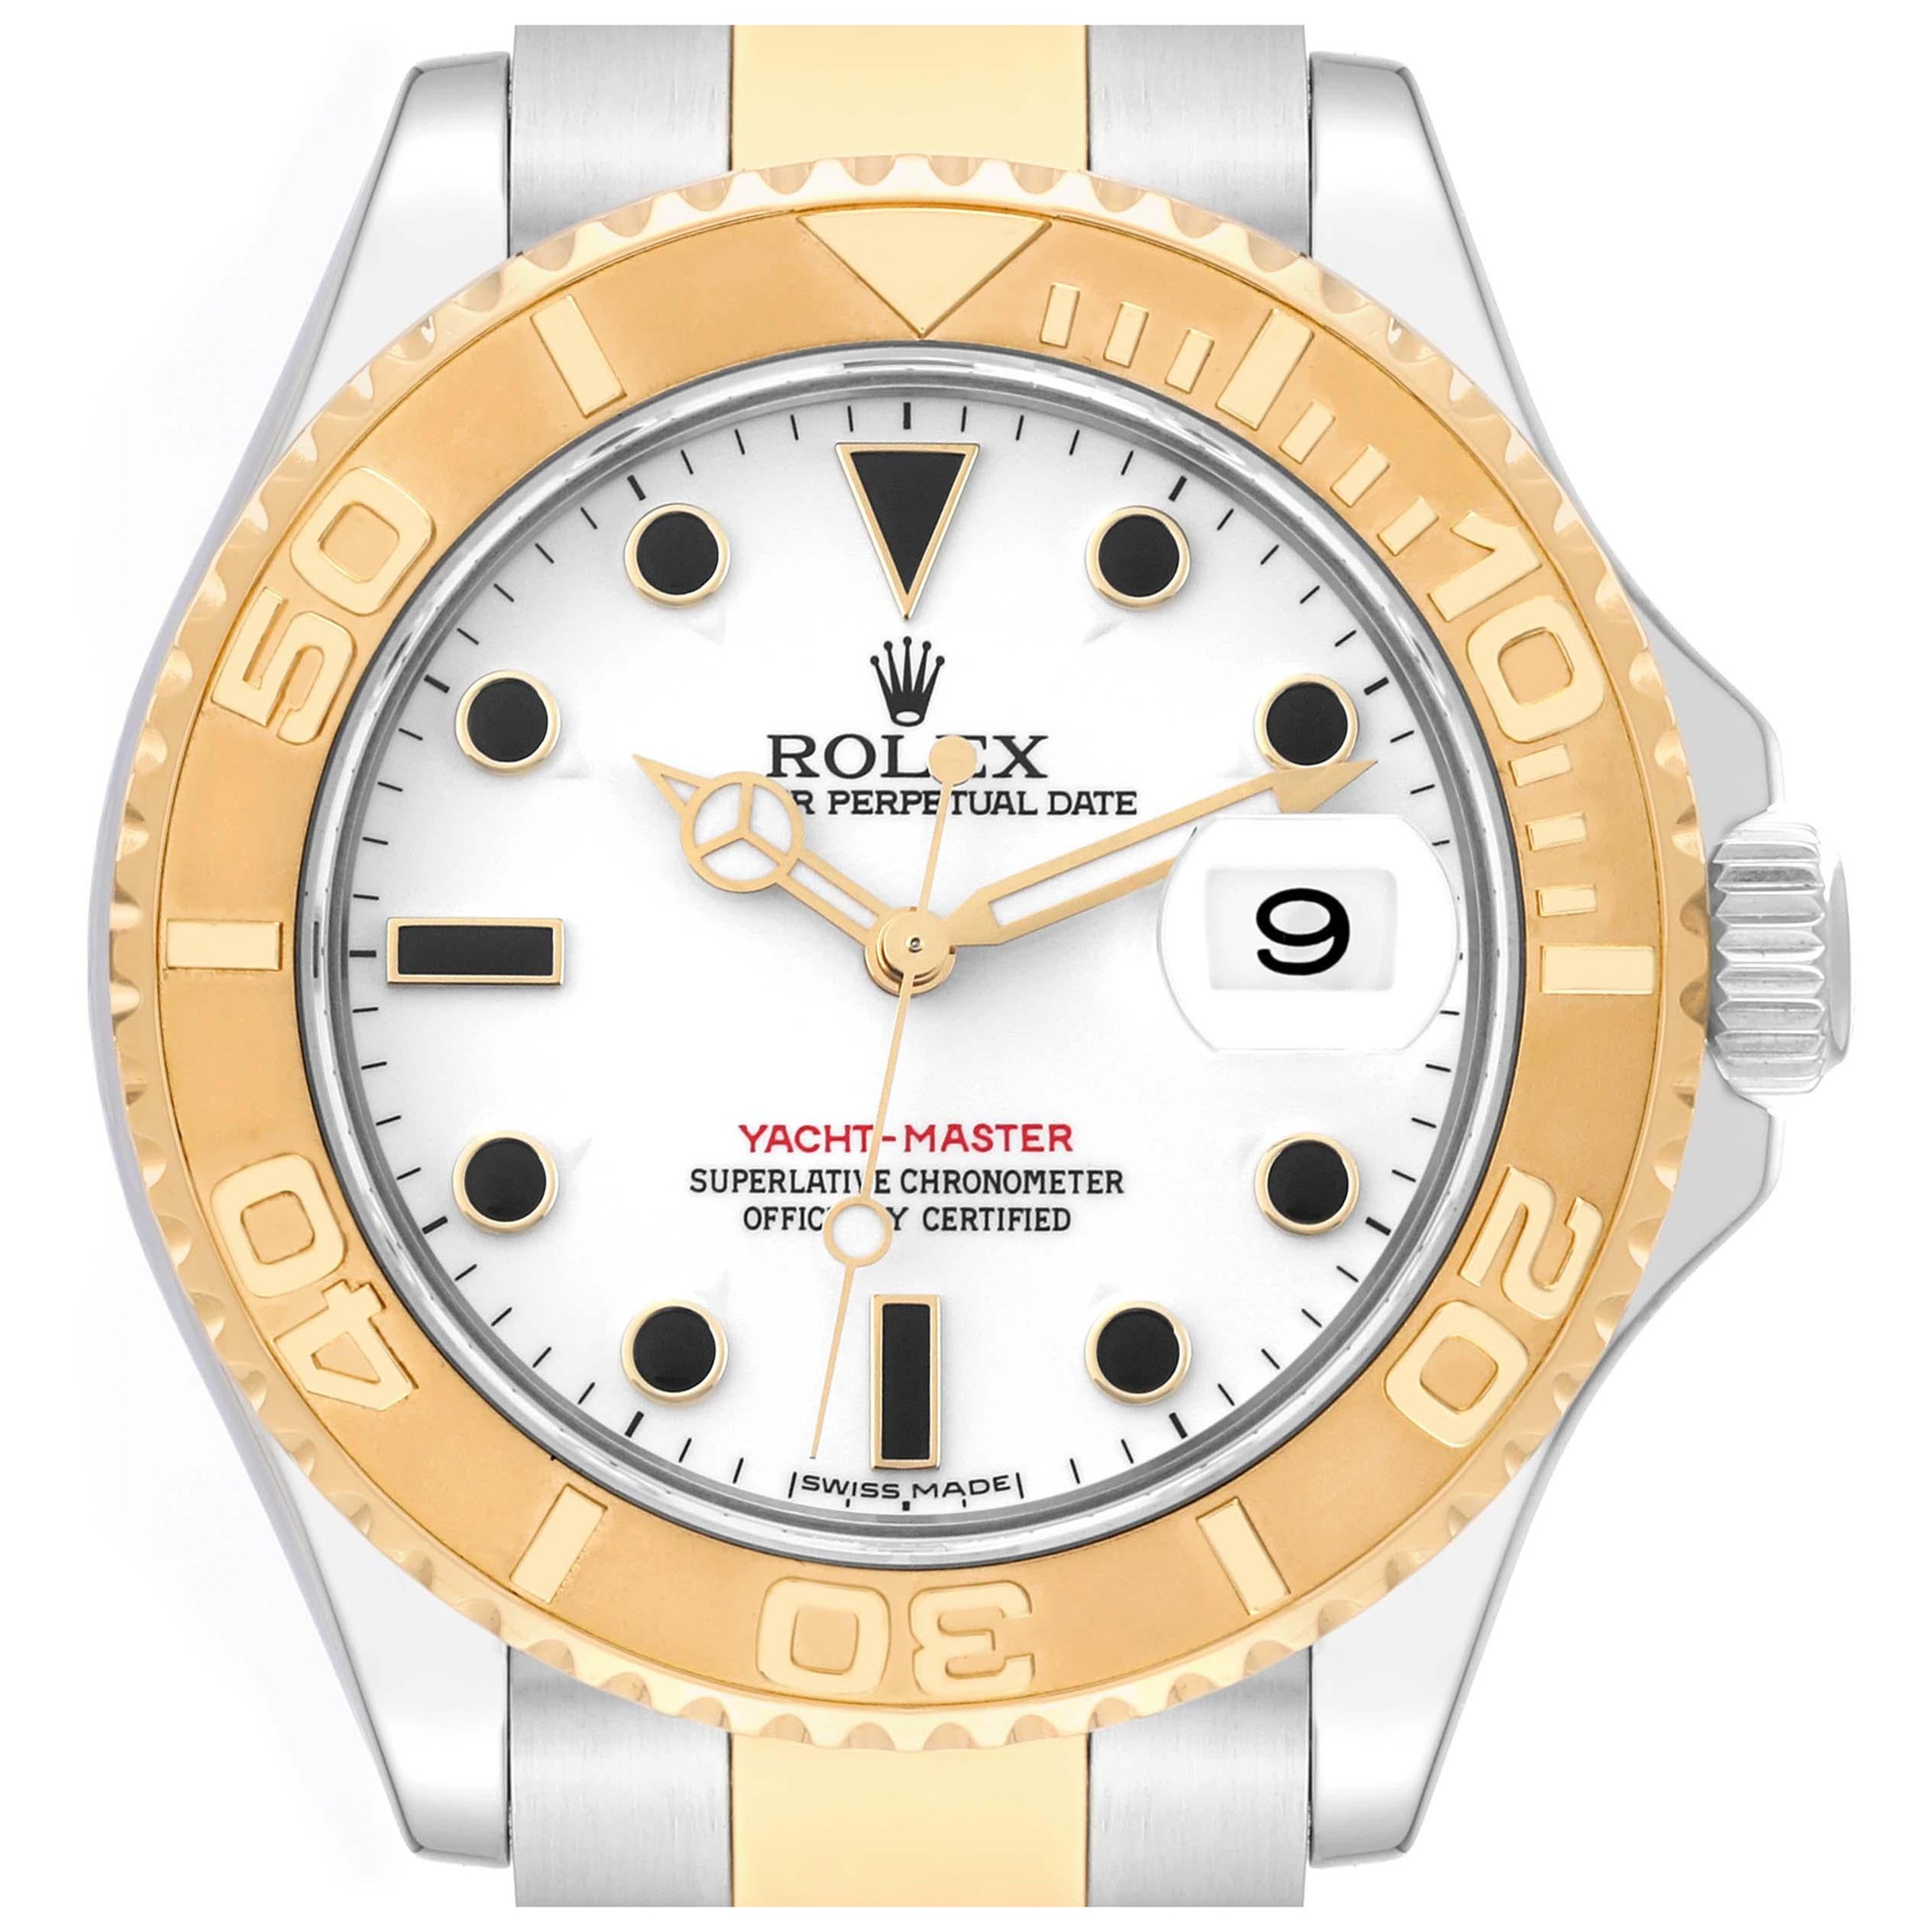 Rolex Yachtmaster Steel Yellow Gold White Dial Mens Watch 16623 Box Papers